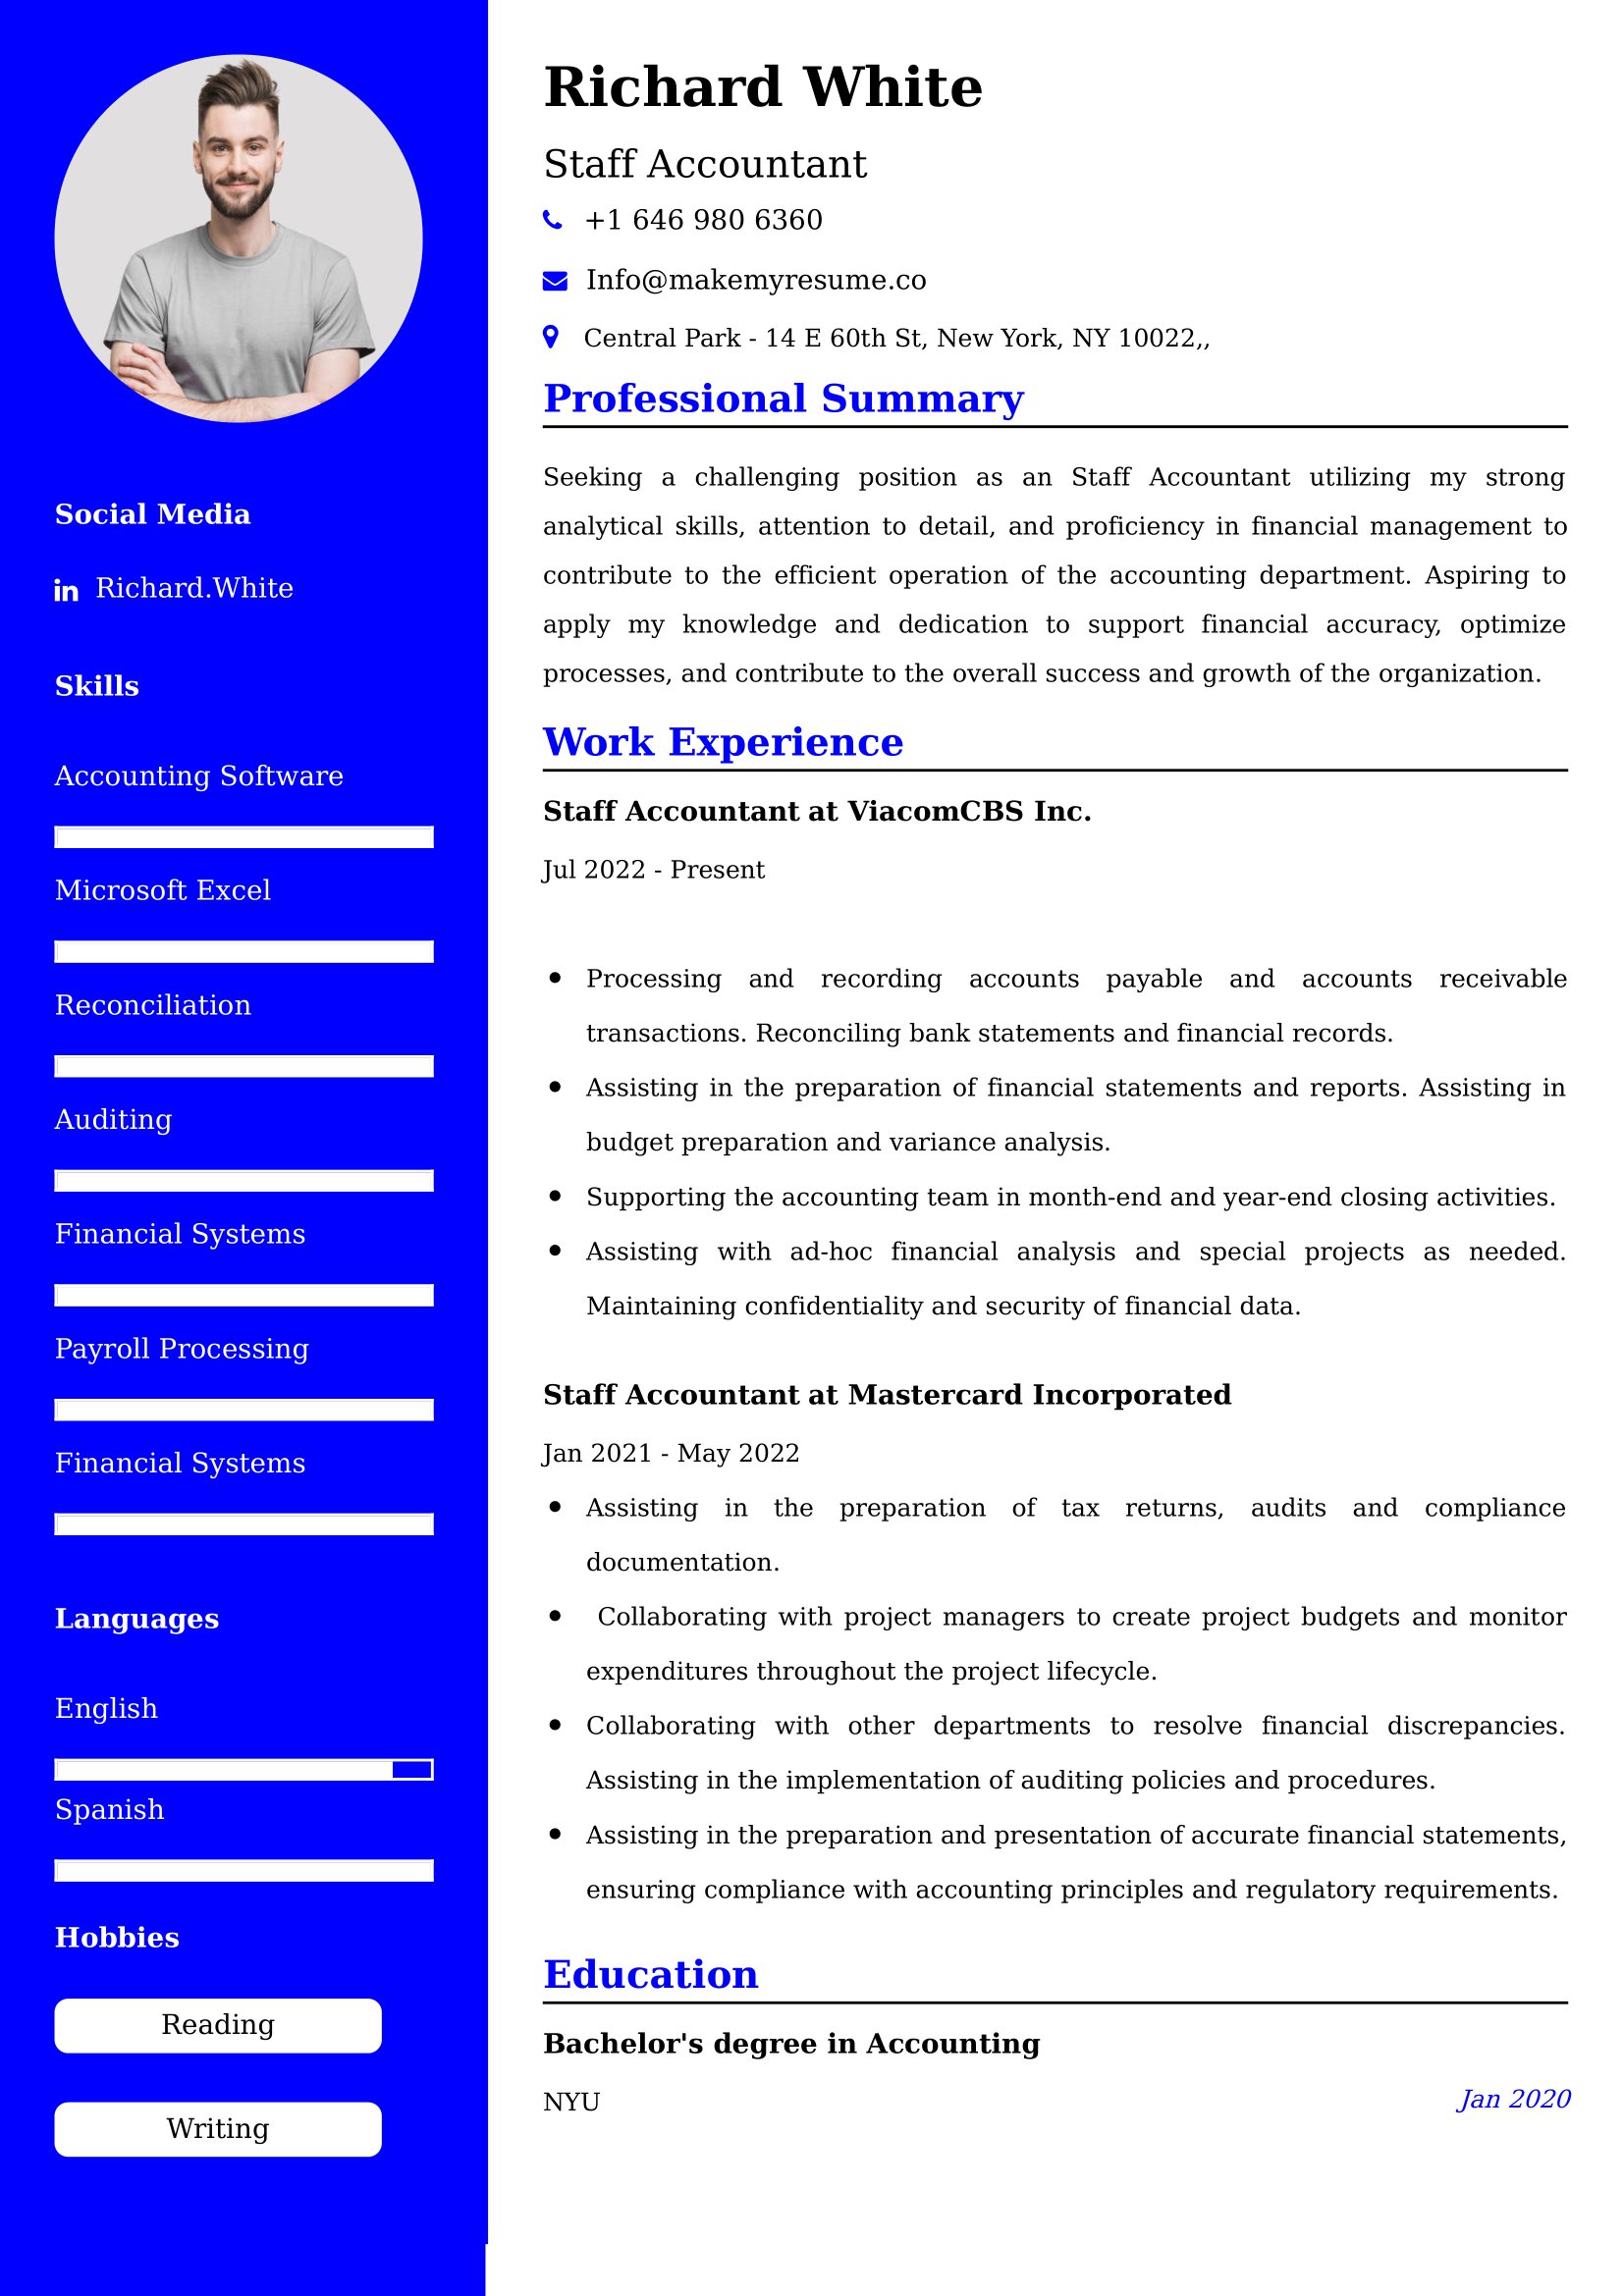 Staff Accountant Resume Examples - UK Format, Latest Template.